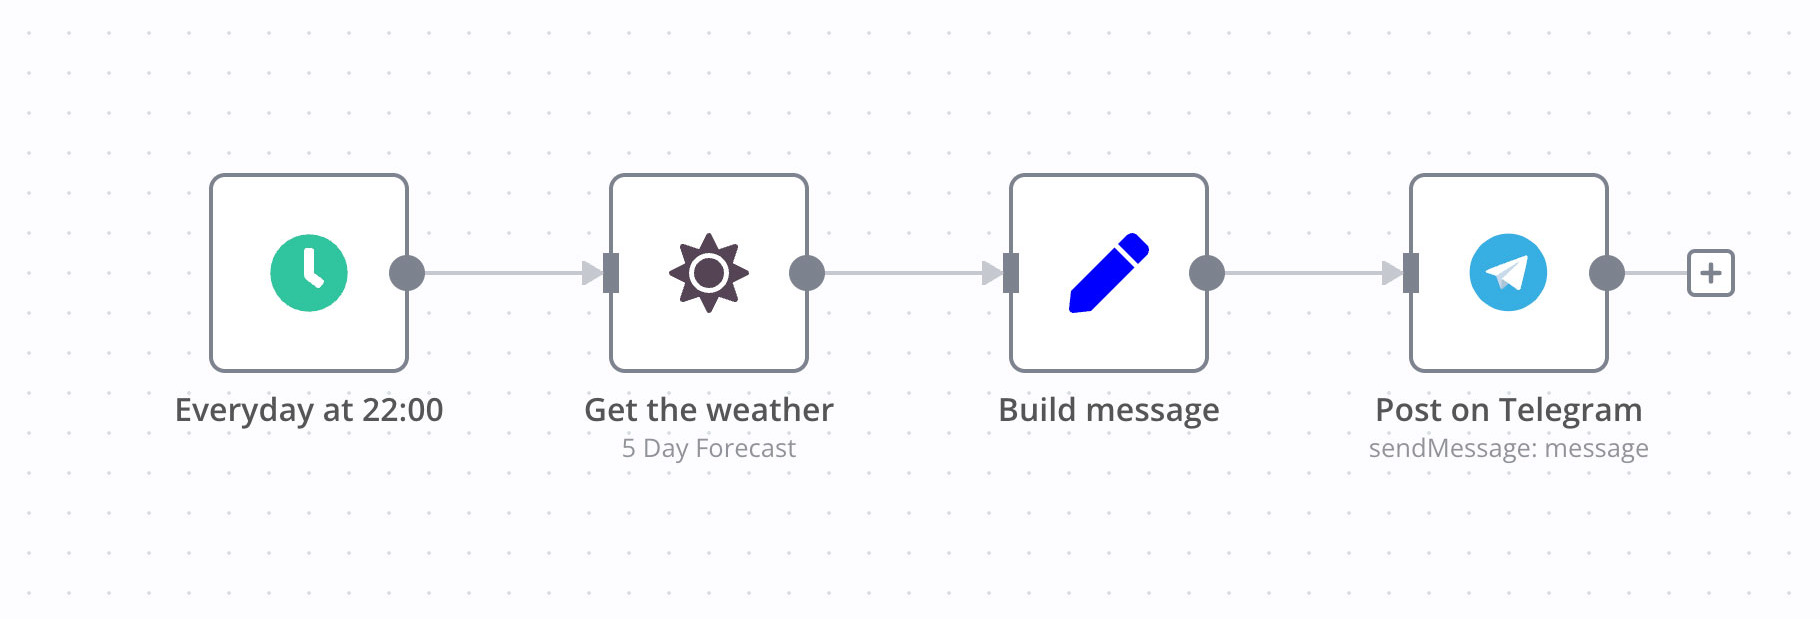 A workflow display how to build a weather forecast automation